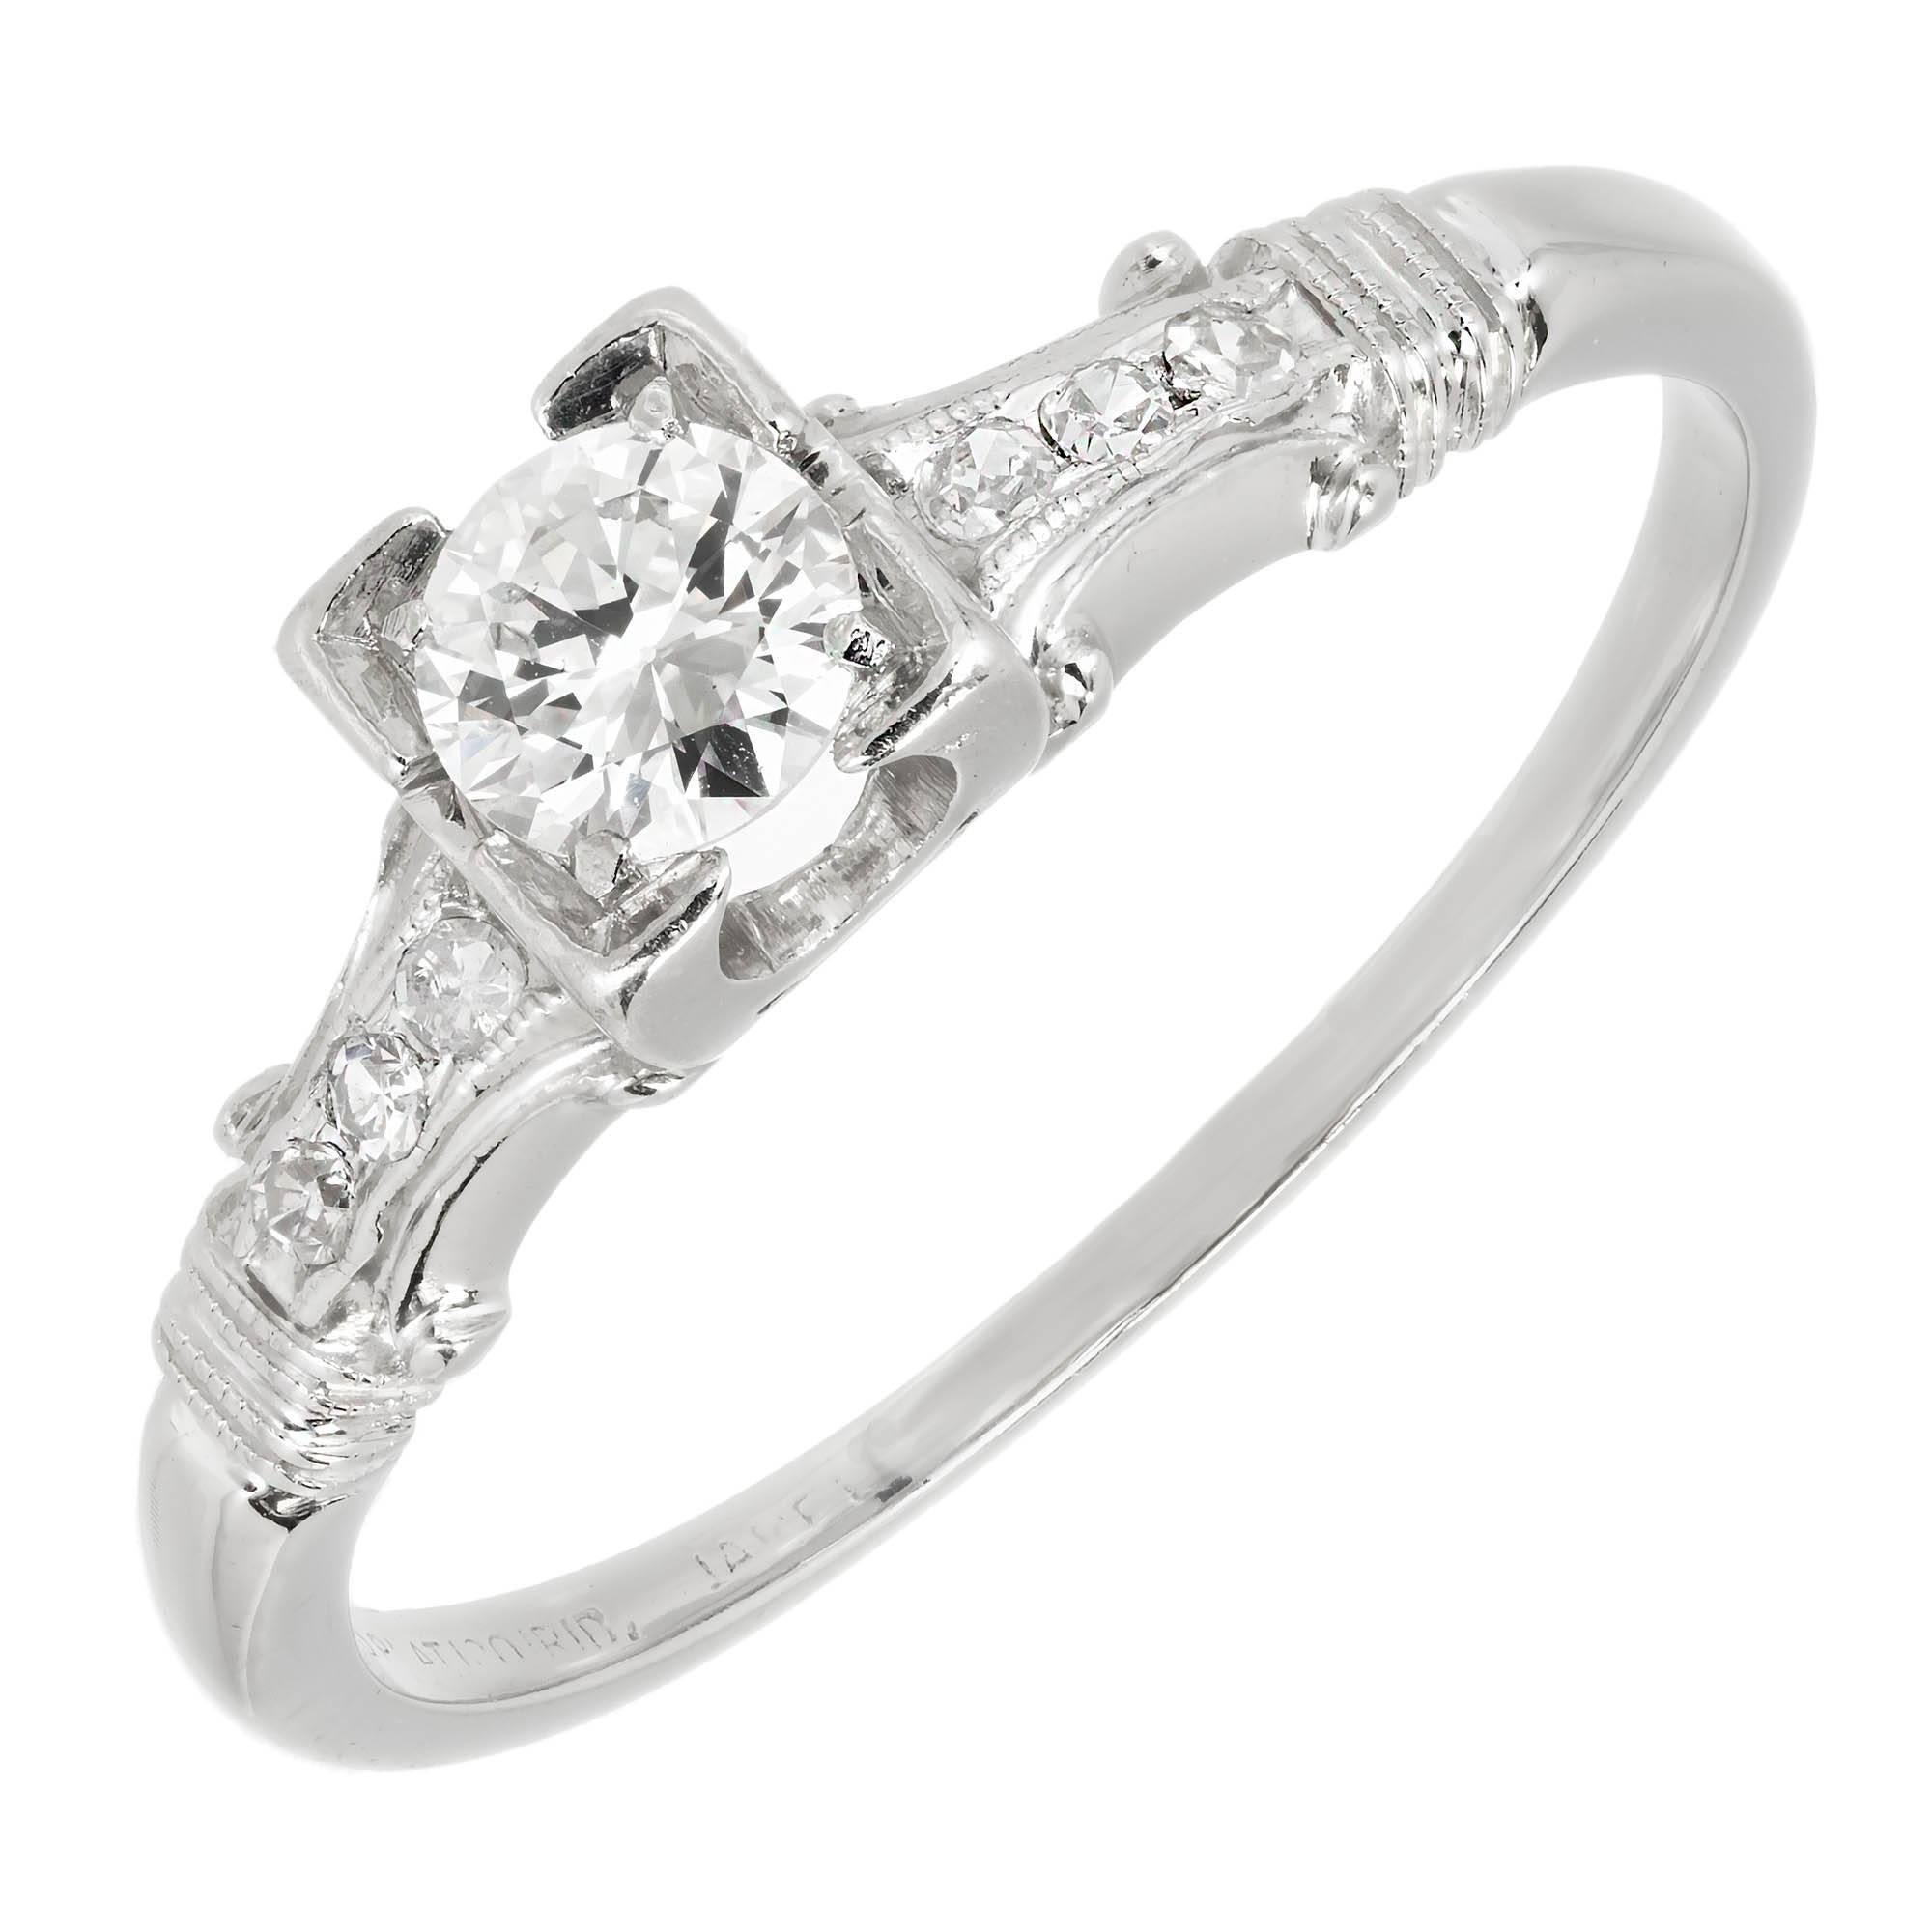 Vintage 1940-1950 Jabel Platinum engagement ring with a transitional cut  EGL certified center Diamond and side accent Diamonds. 

1 transitional brilliant cut Diamond, approx. total weight .30cts, F – G, VS2, EGL certificate # US313982601D 
6